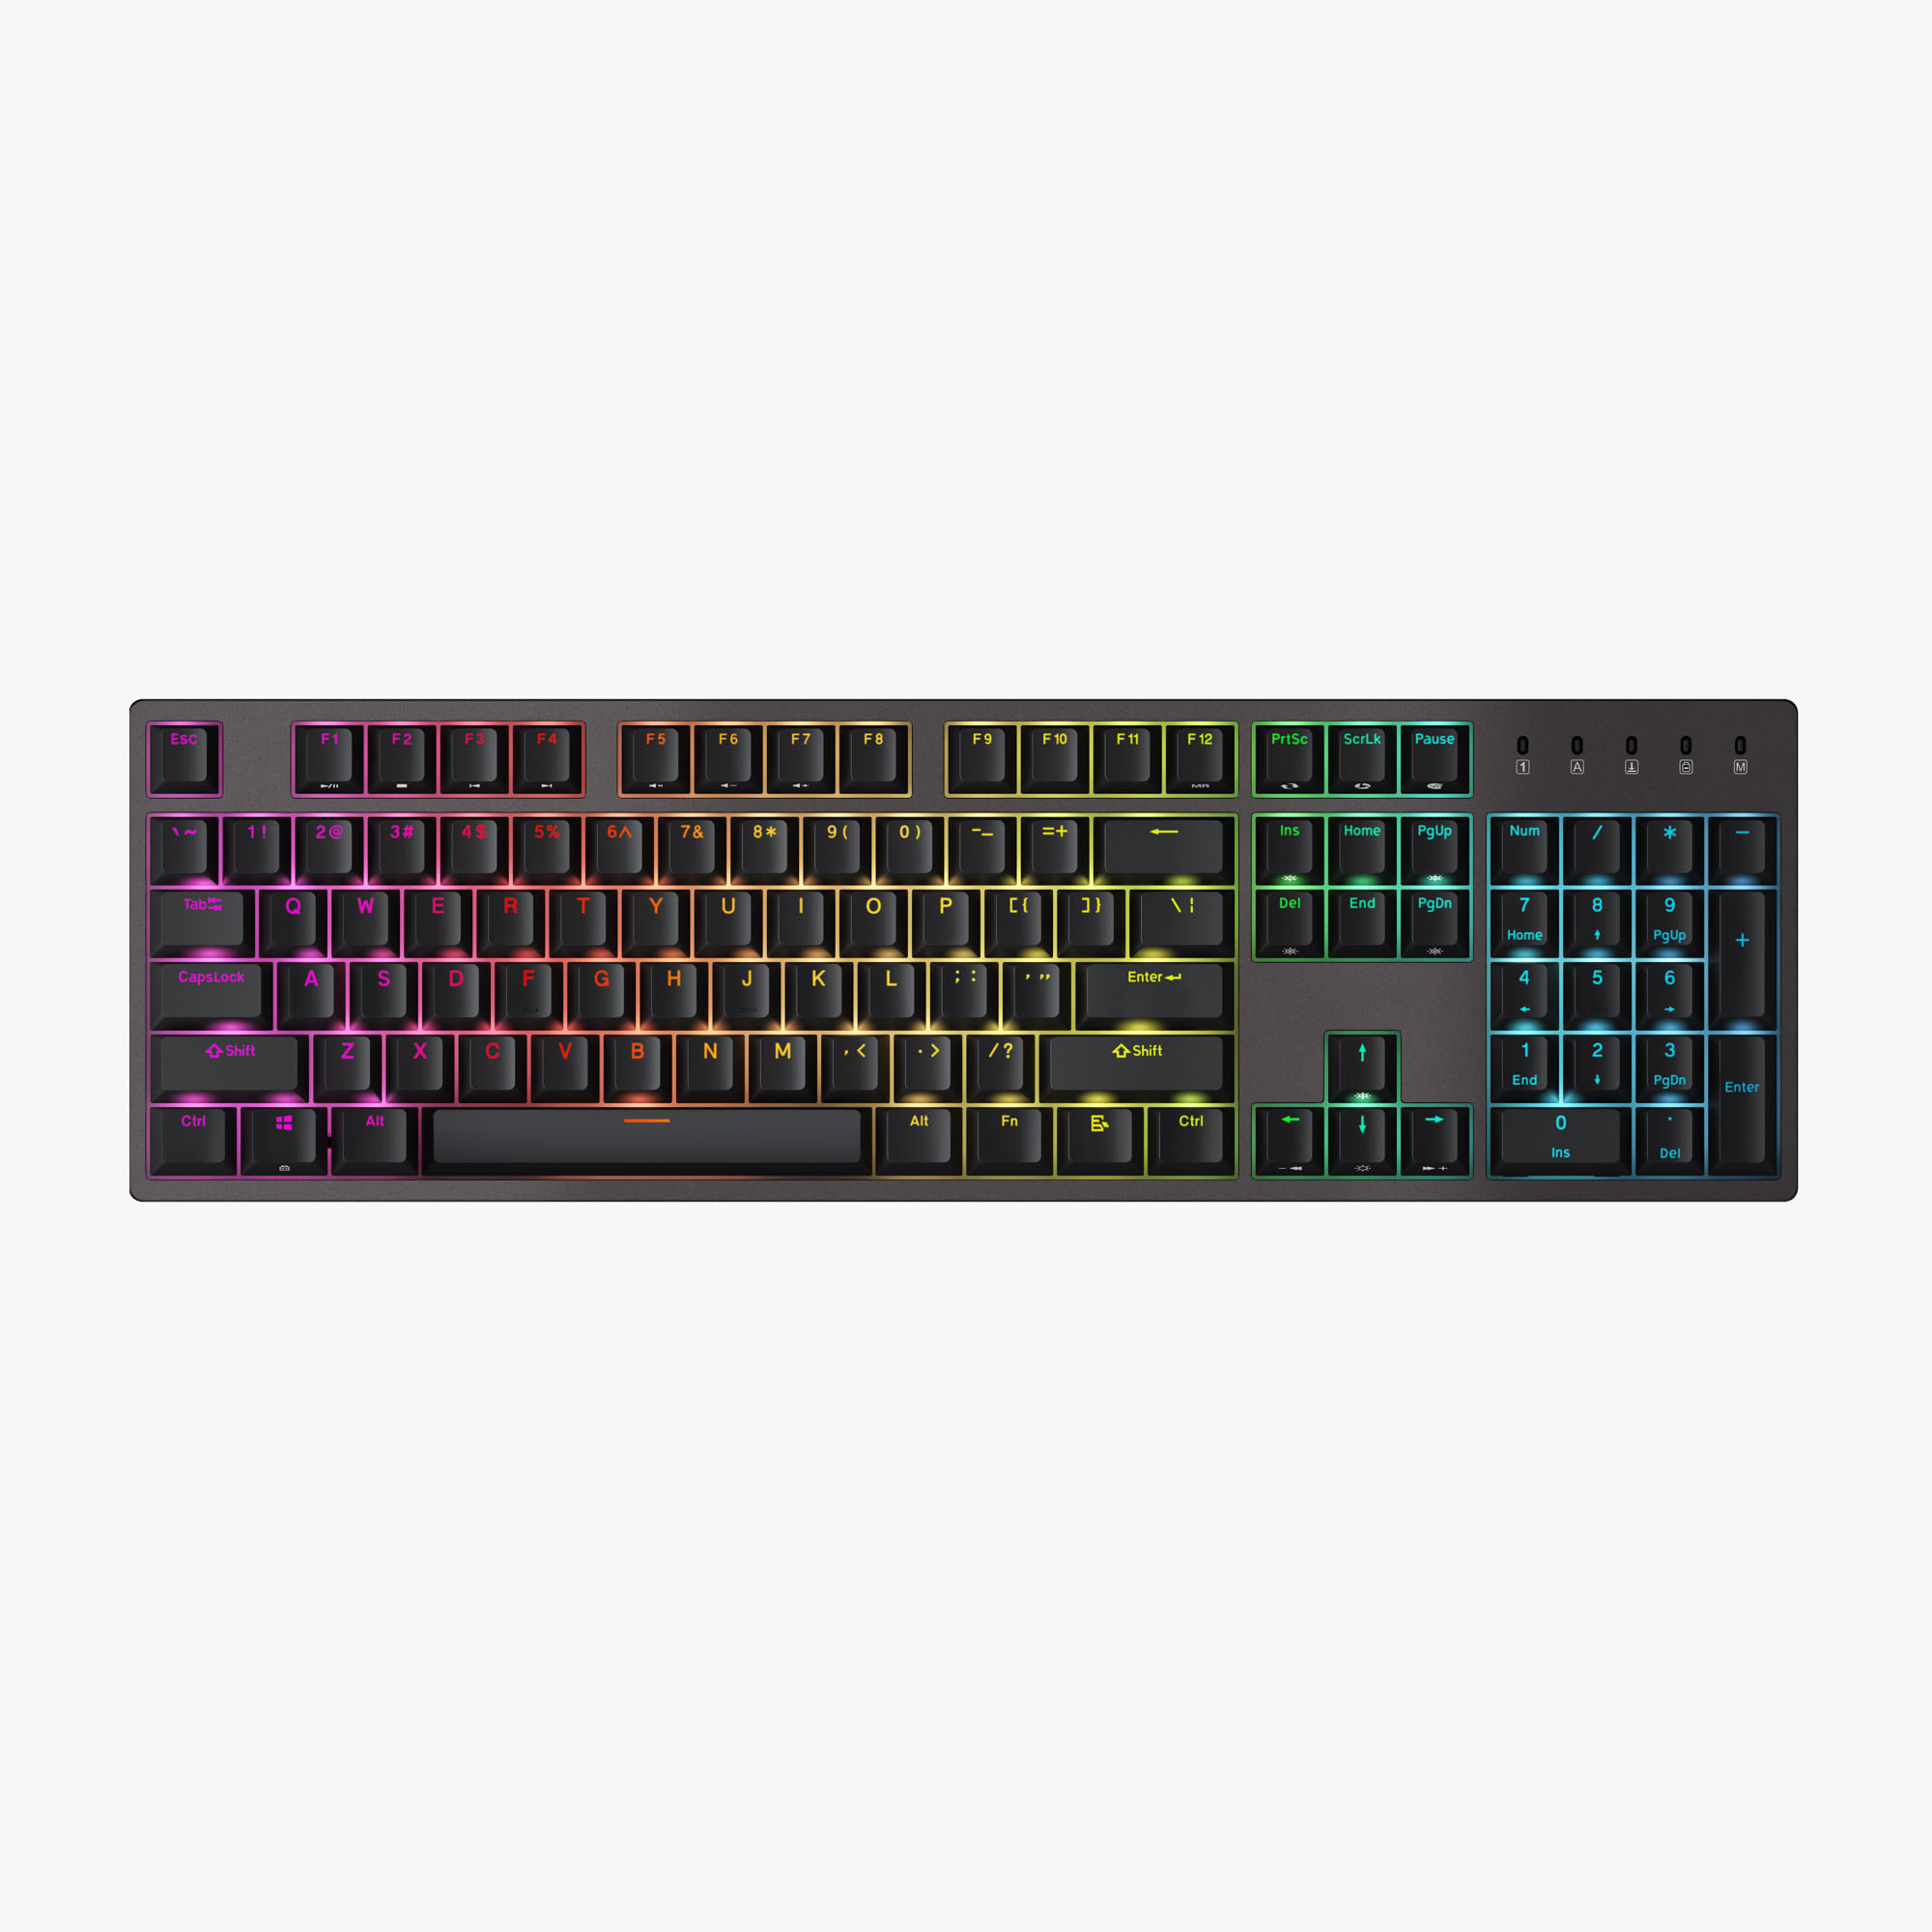 K310 RGB Mechanical Keyboard | Your Best Comrade in Gaming Batterfield